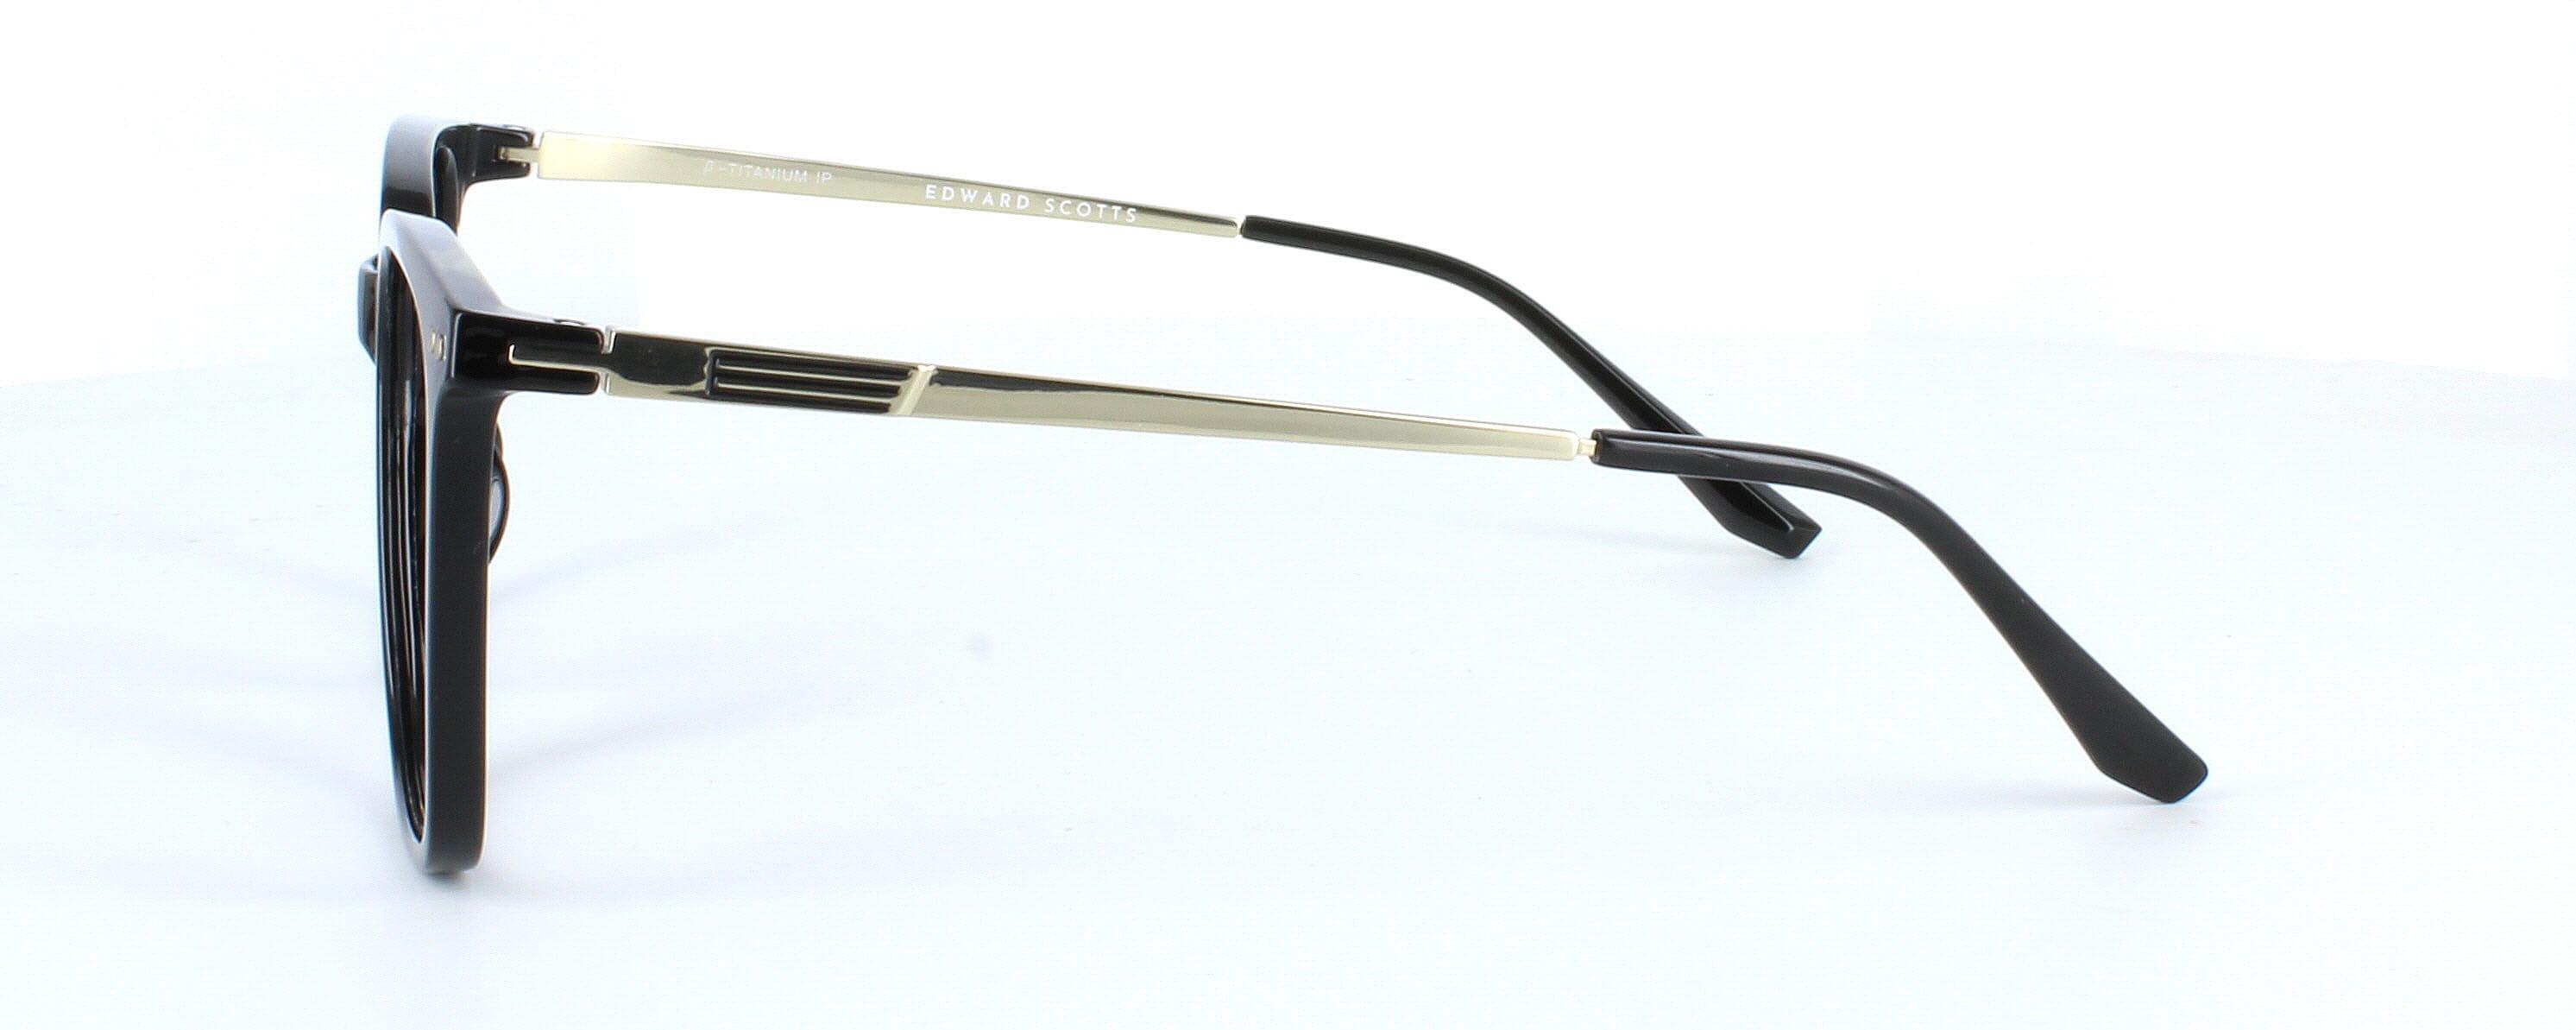 Edward Scotts ST6202 - Shiny black - Gent's acetate frame with square shaped lenses with silver titanium arms - image view 3